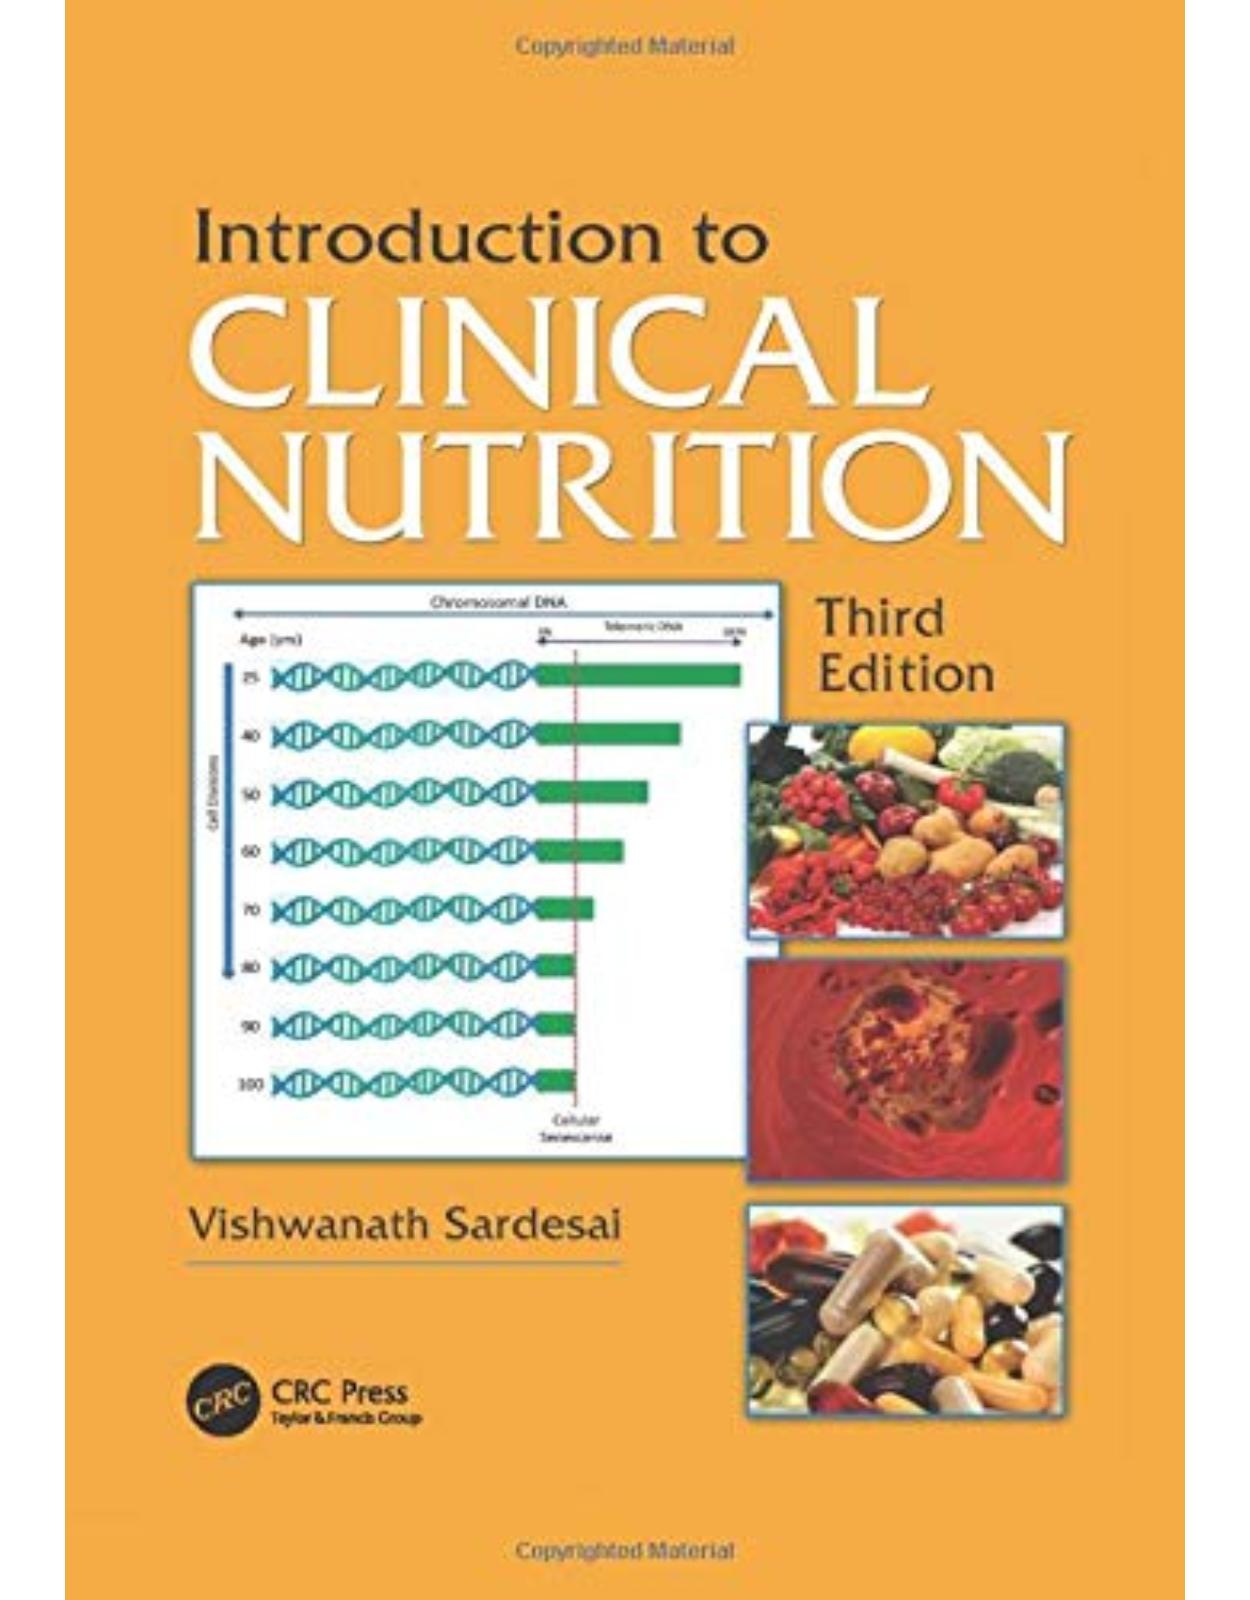 Introduction to Clinical Nutrition